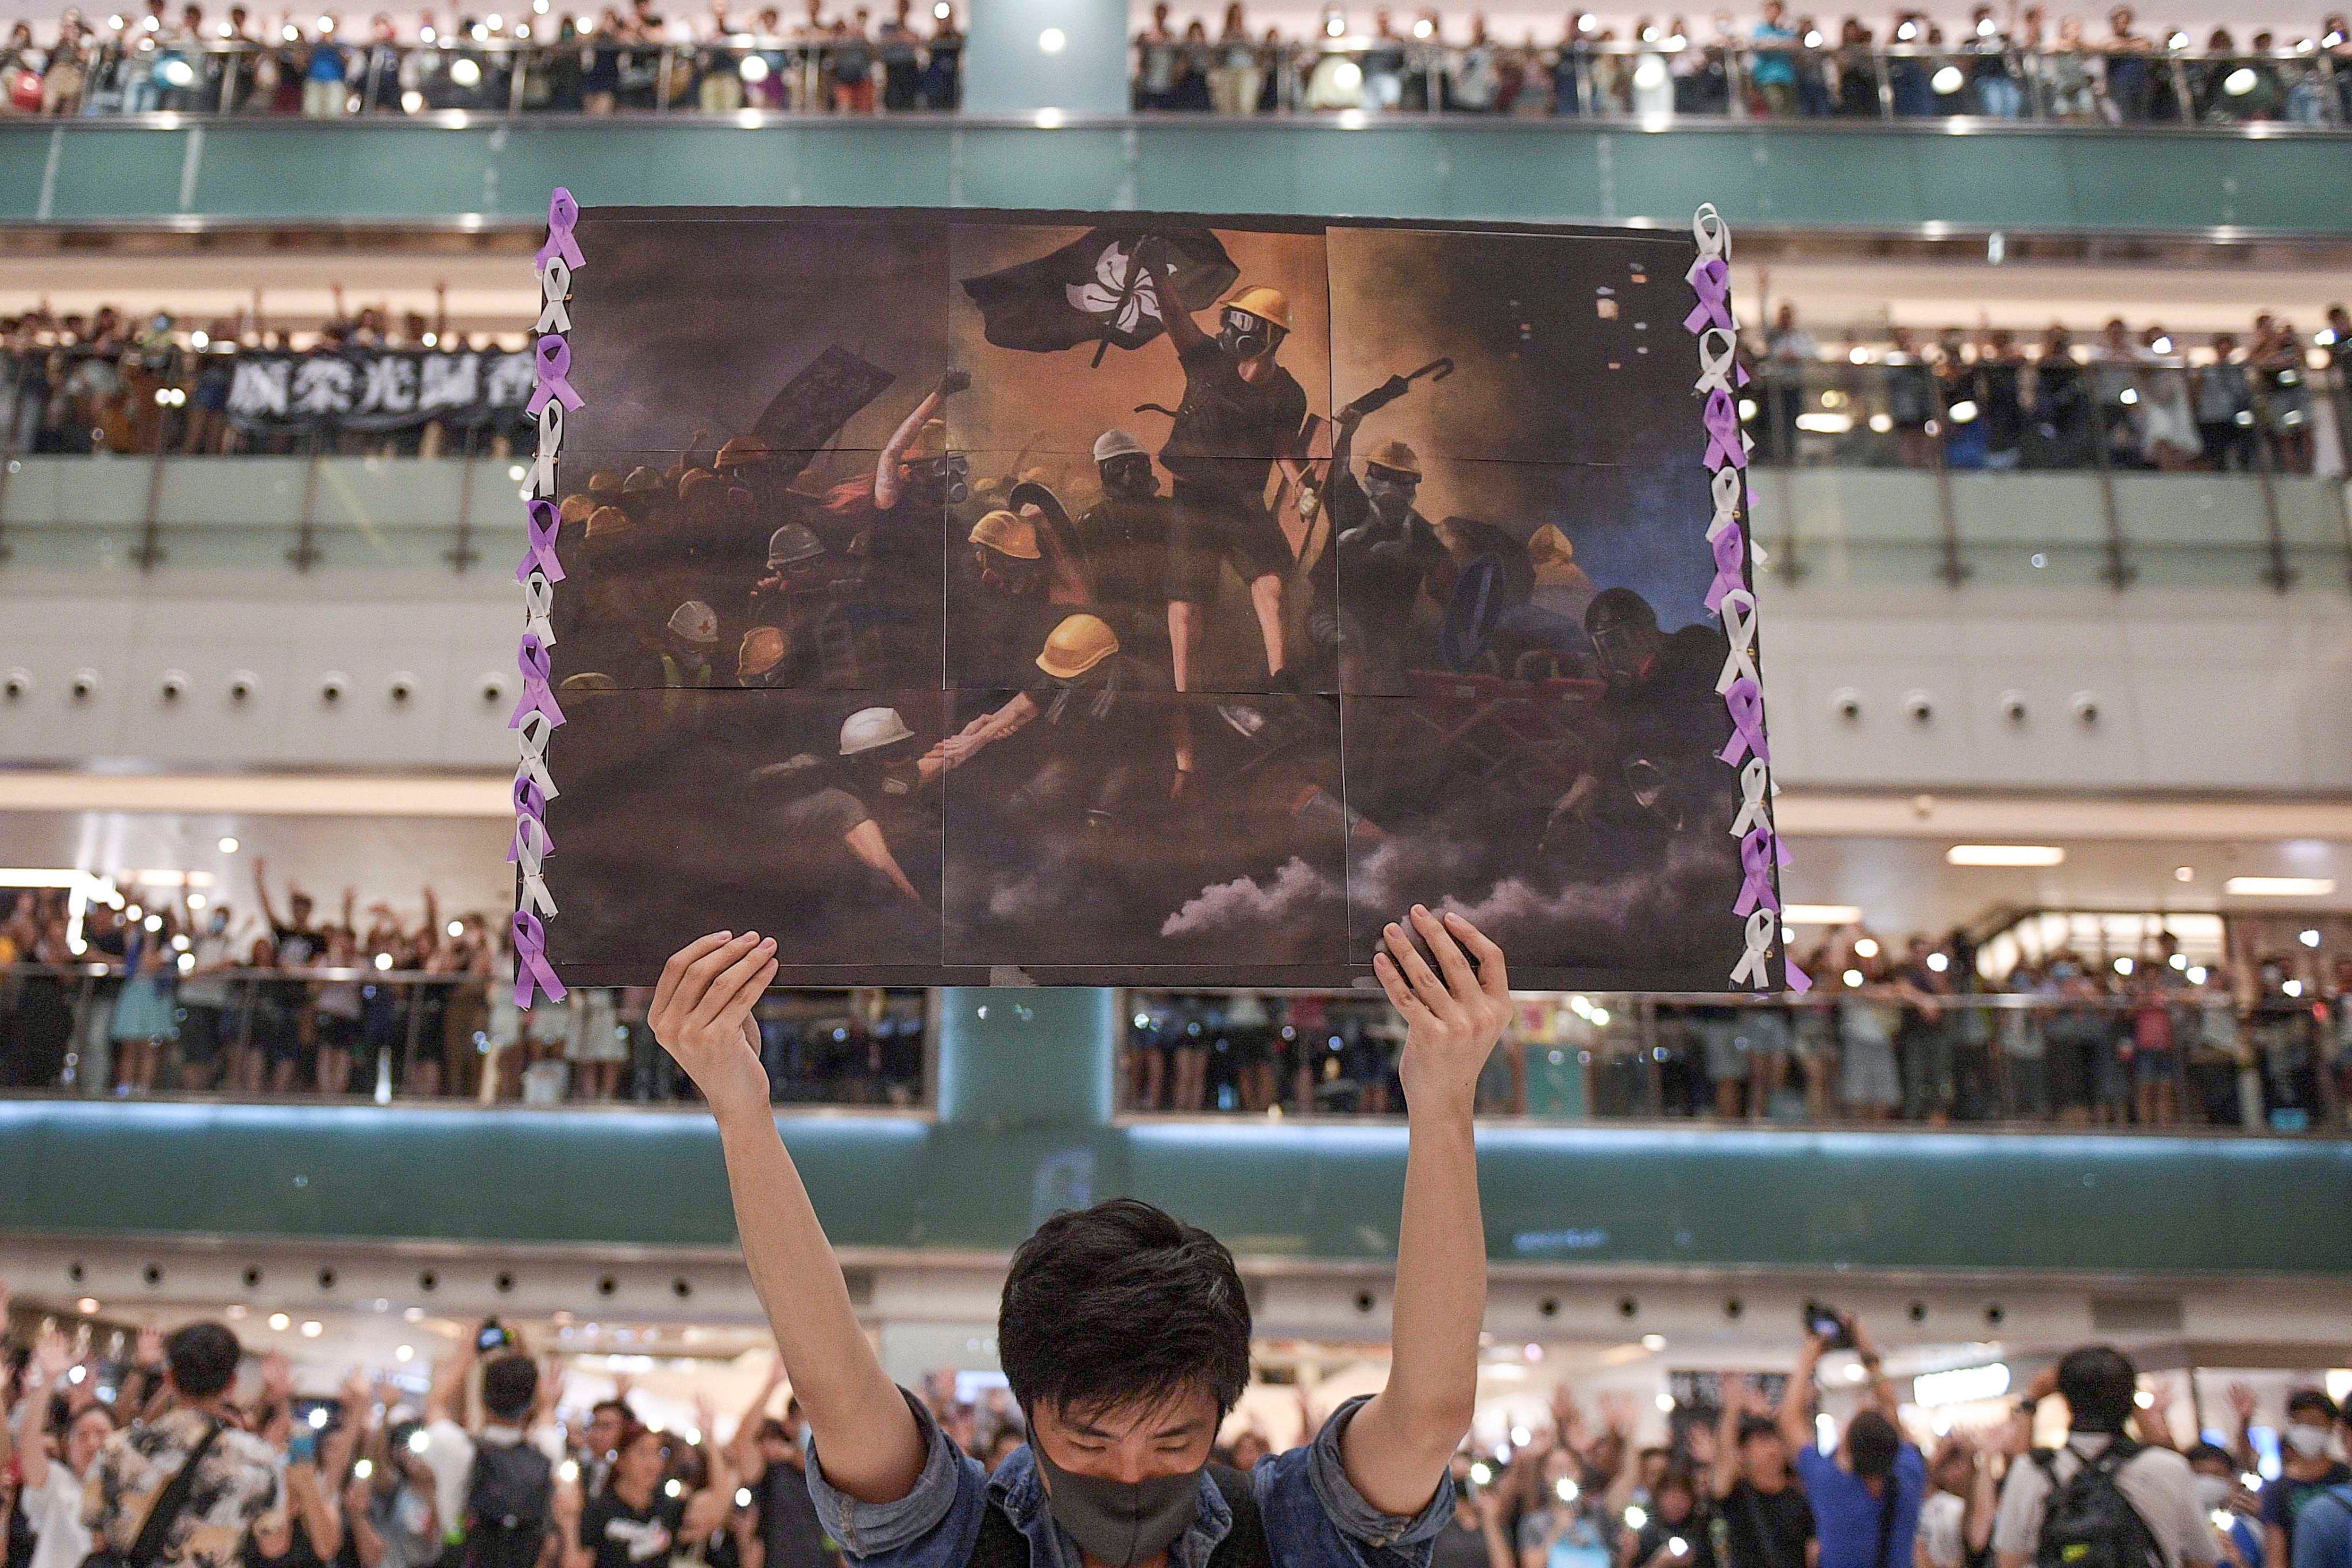 Composed by protesters on the online forum LIHKG, “Glory to Hong Kong” was first released at the height of the 2019 social unrest. Photo: AFP